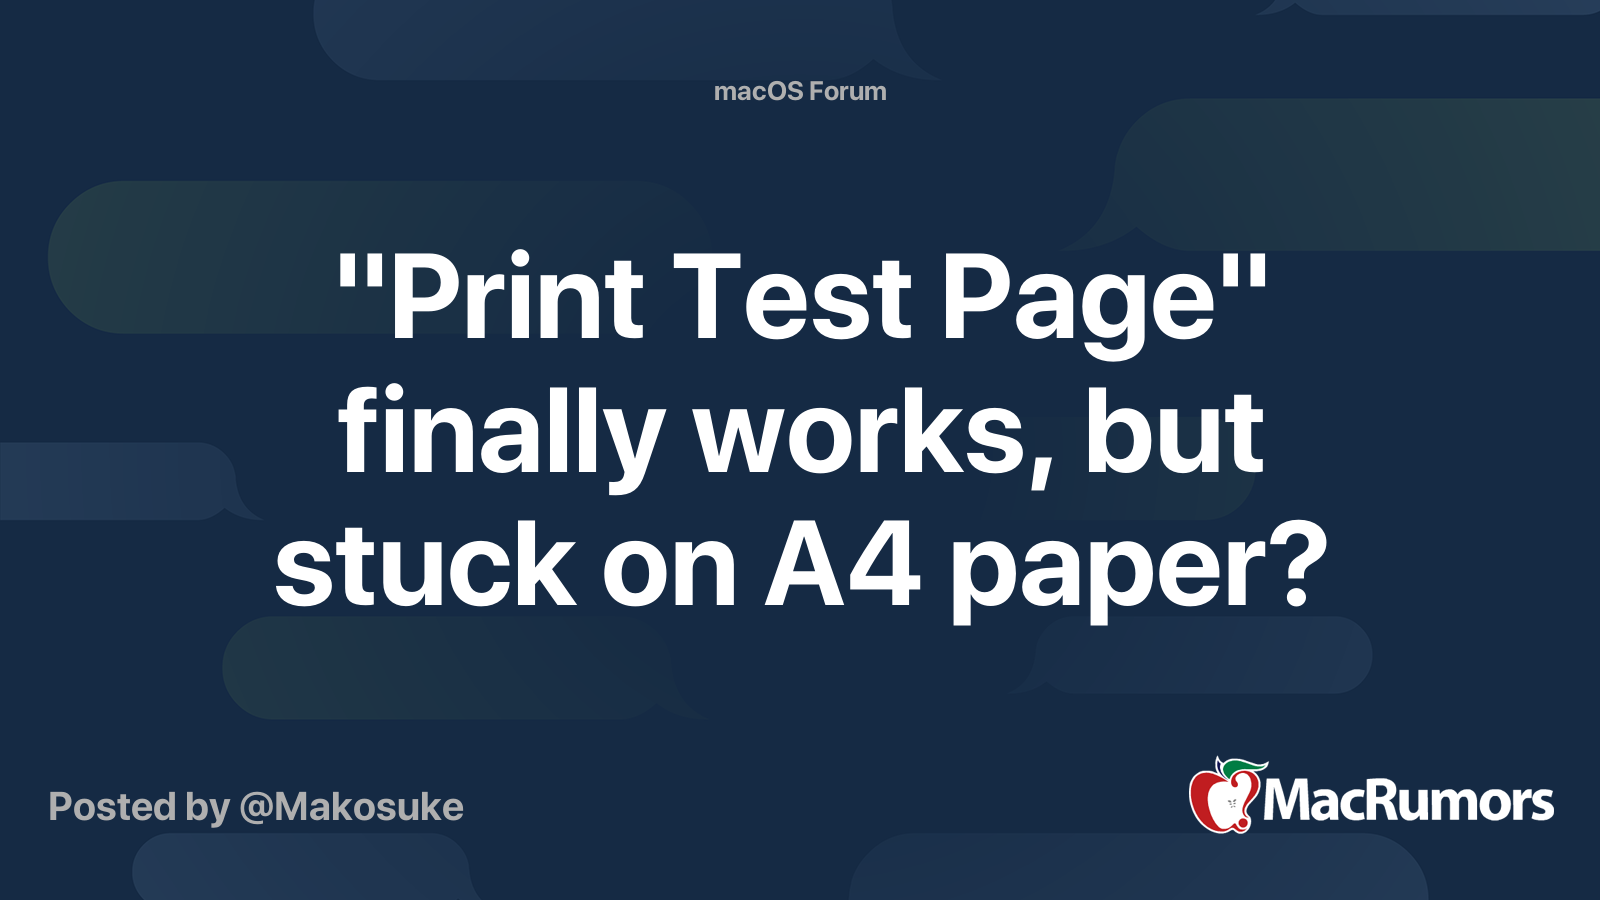 print-test-page-finally-works-but-stuck-on-a4-paper-macrumors-forums